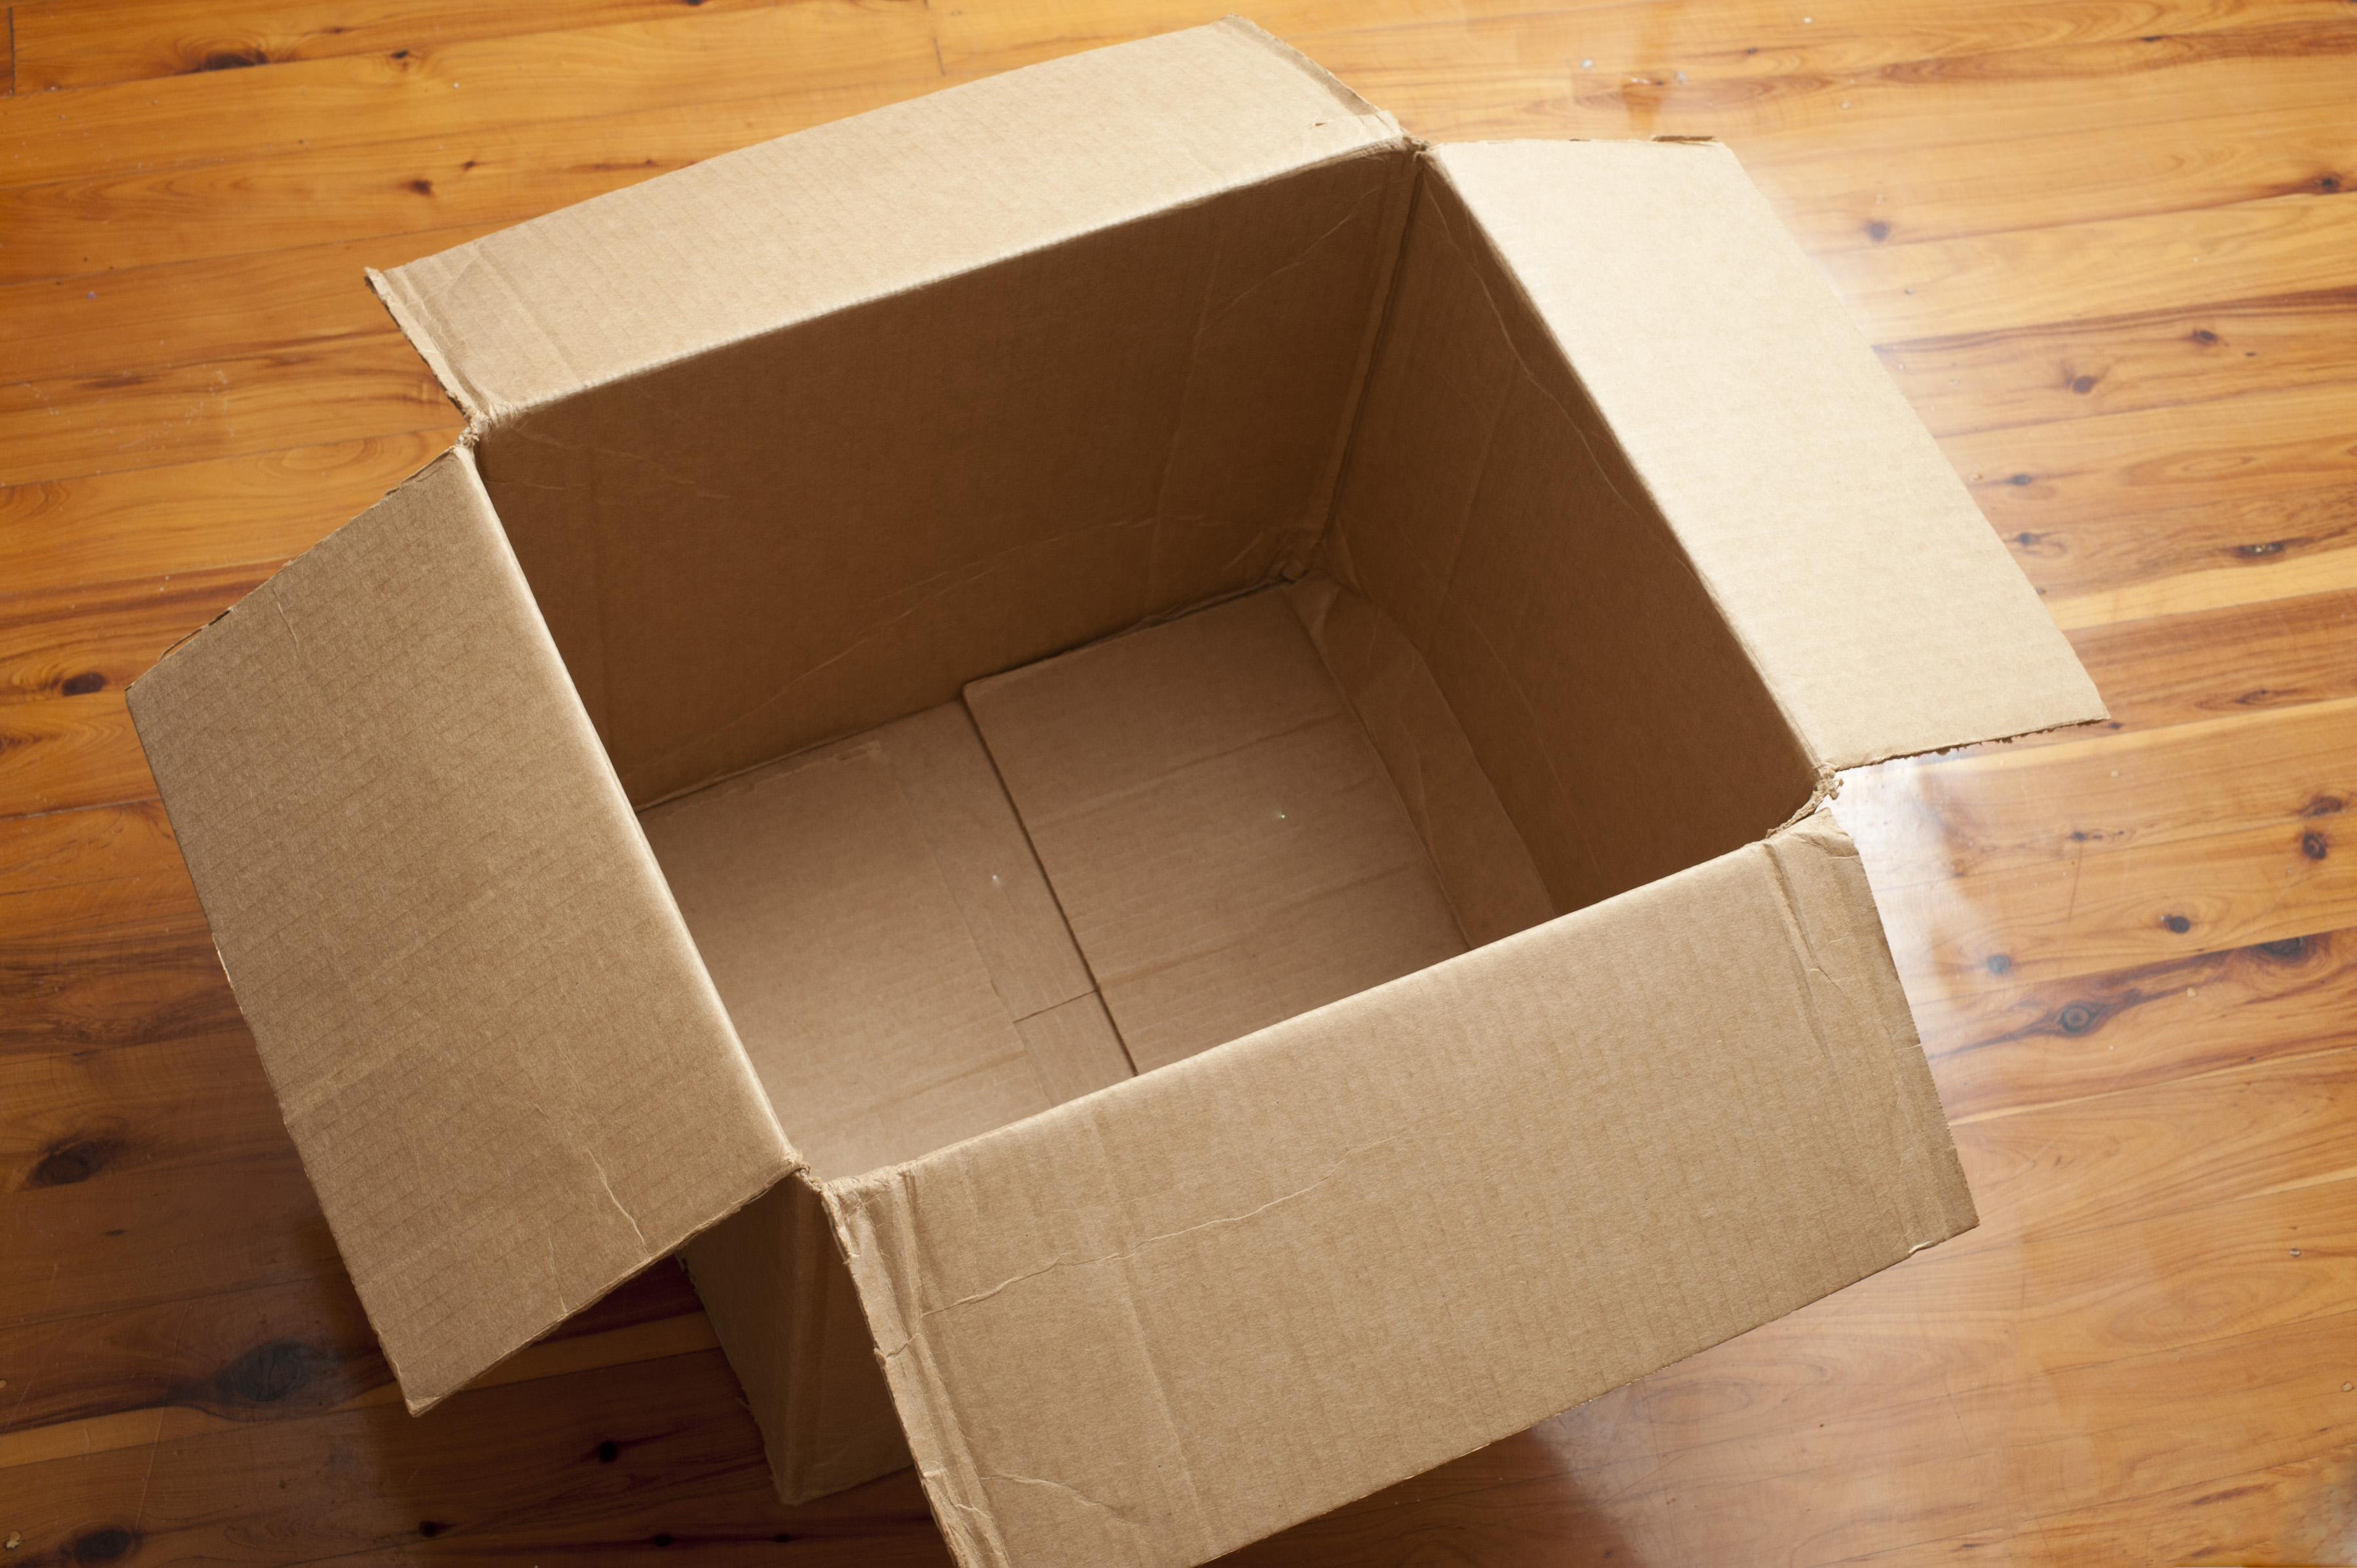 Empty Cardboard Box with Open Flaps on Wood Floor | Free backgrounds ...